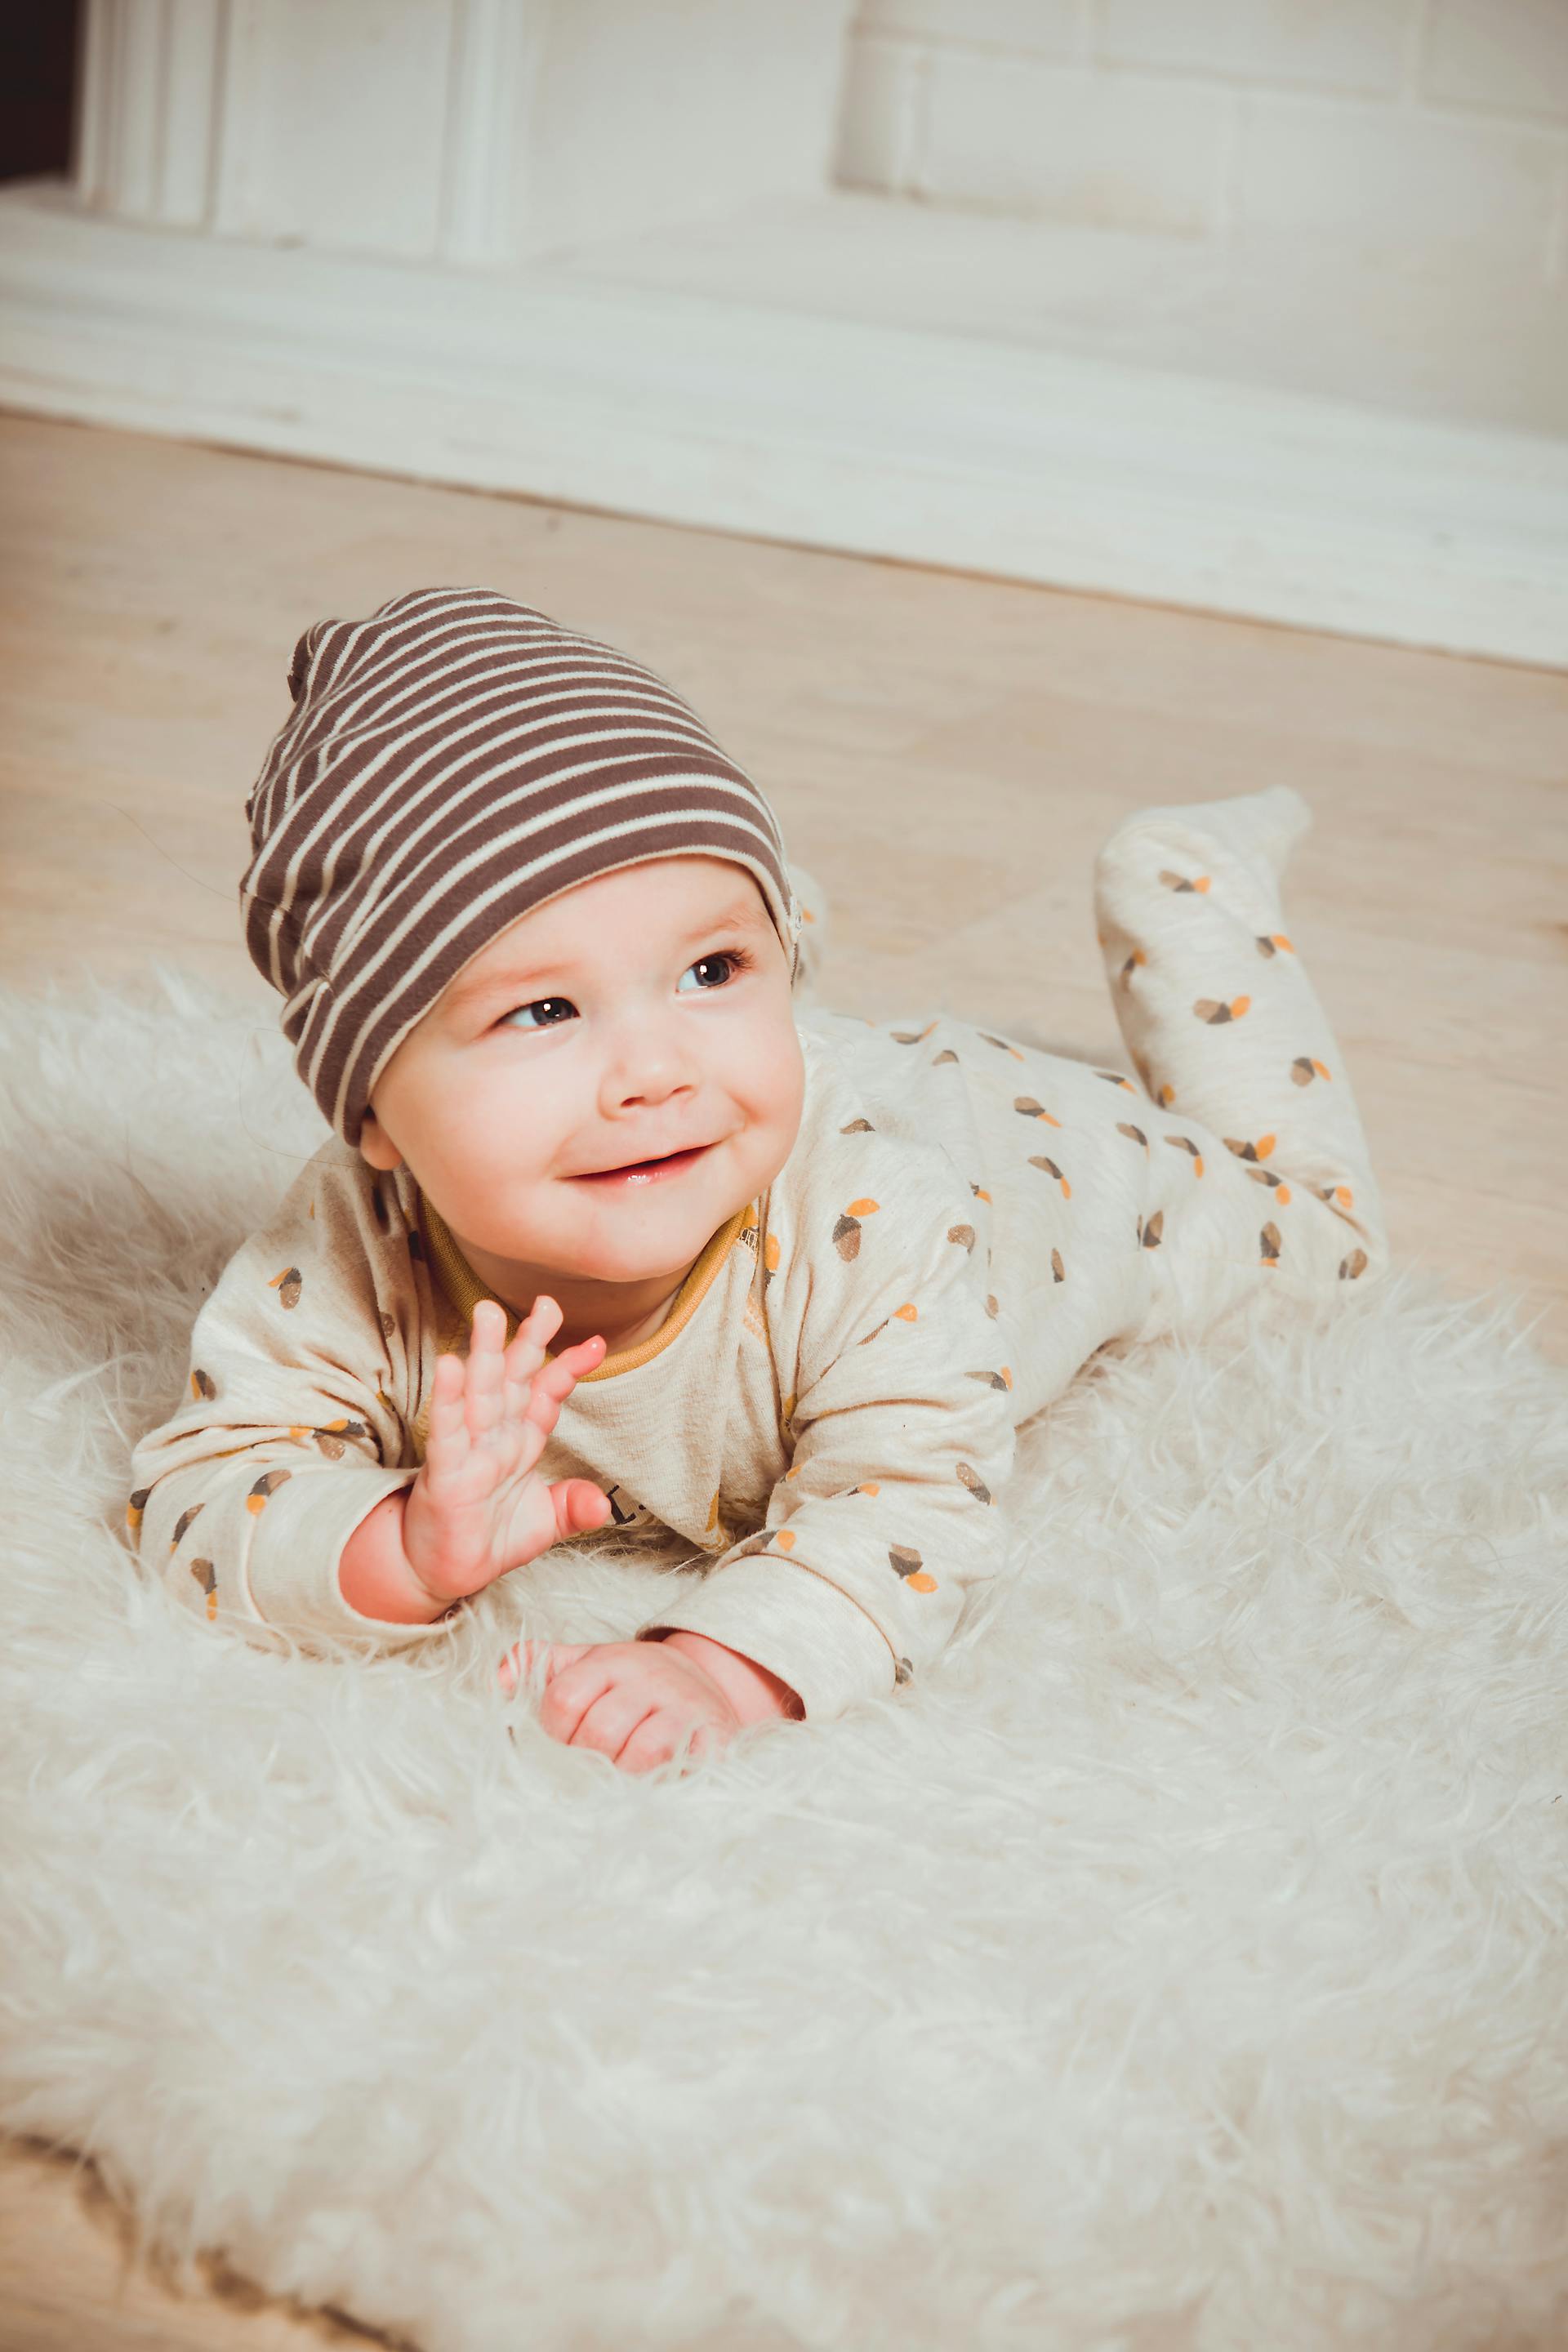 A smiling baby on a mat | Source: Pexels